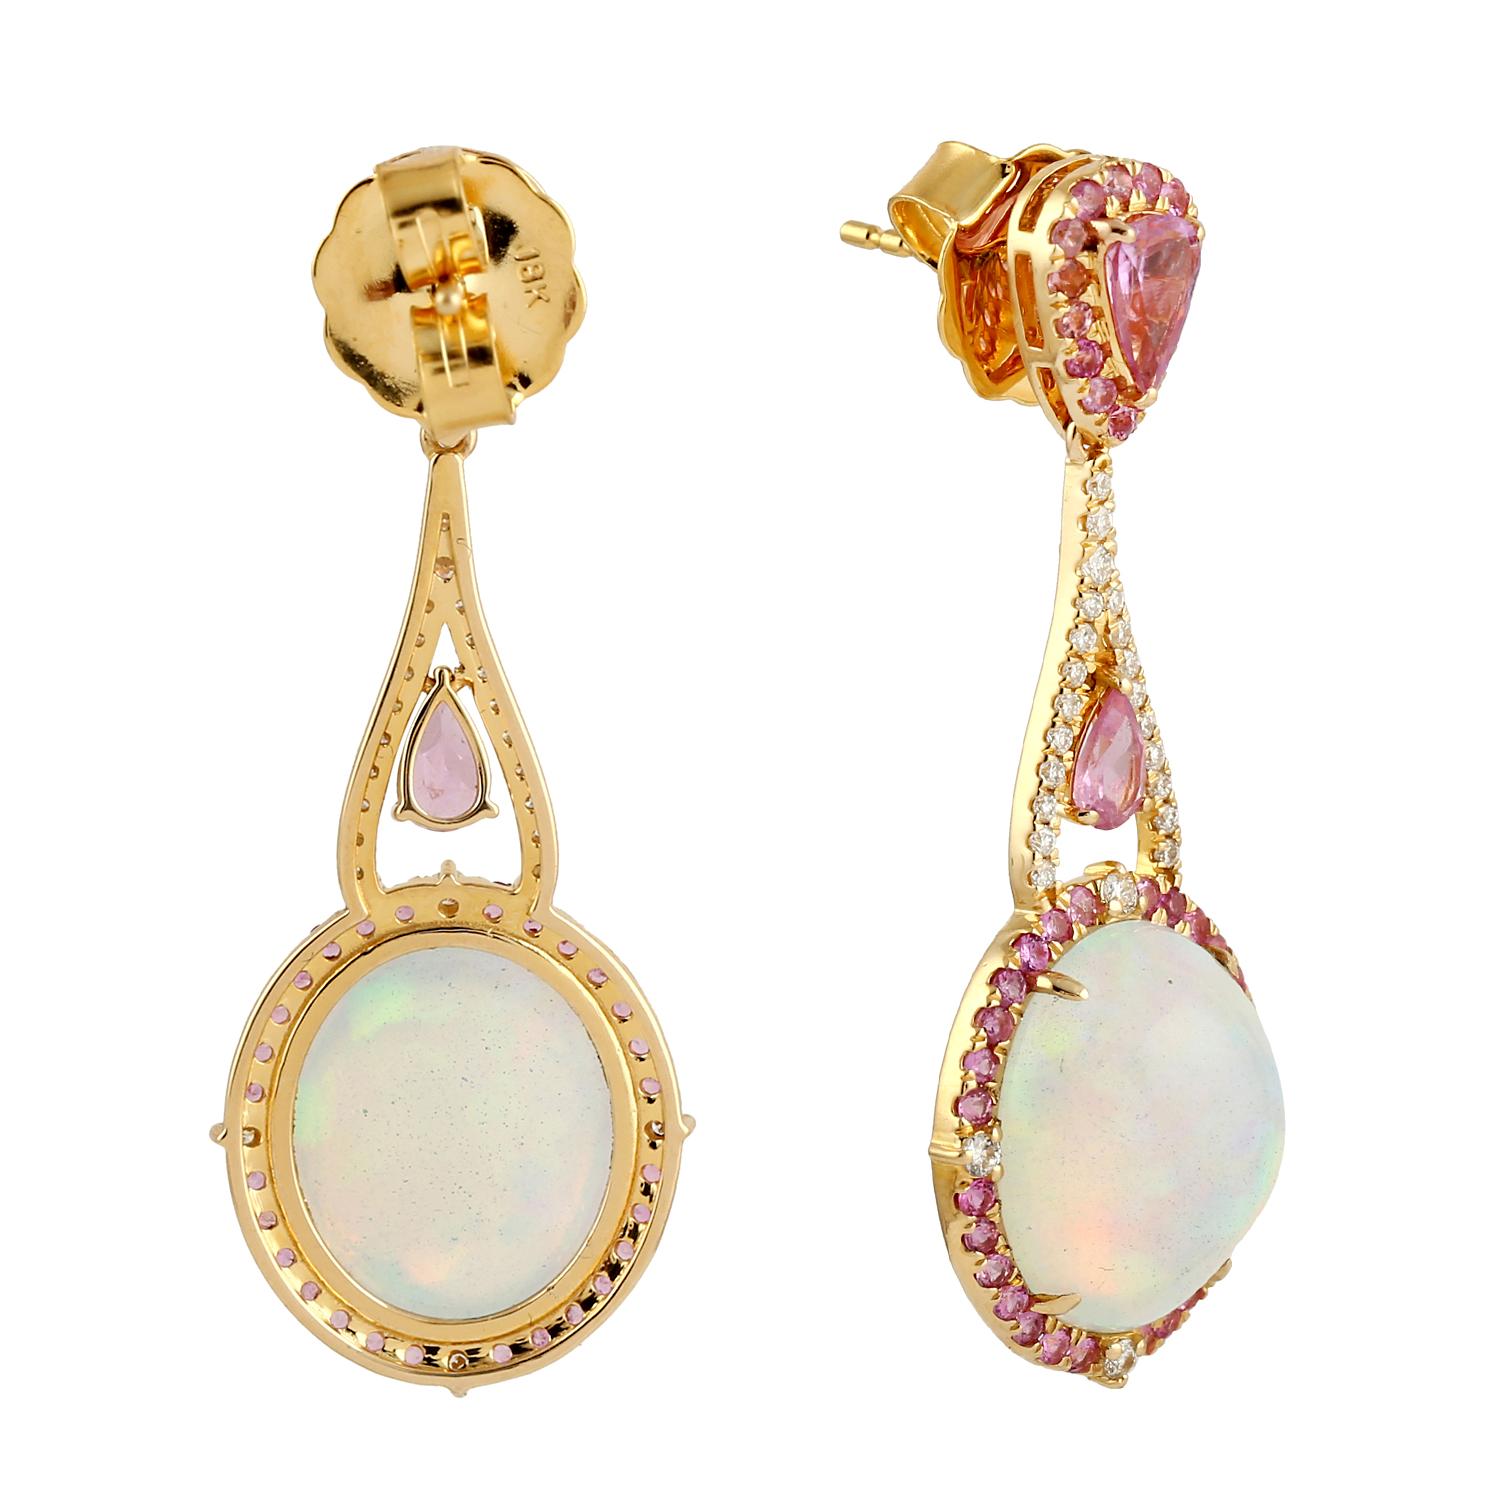 Cast in 14 karat gold. These earrings are hand set in 9.15 carats Ethiopian opal, 2.5 carats pink sapphire and .38 carats of sparkling diamonds. Matching ring available.

FOLLOW MEGHNA JEWELS storefront to view the latest collection & exclusive